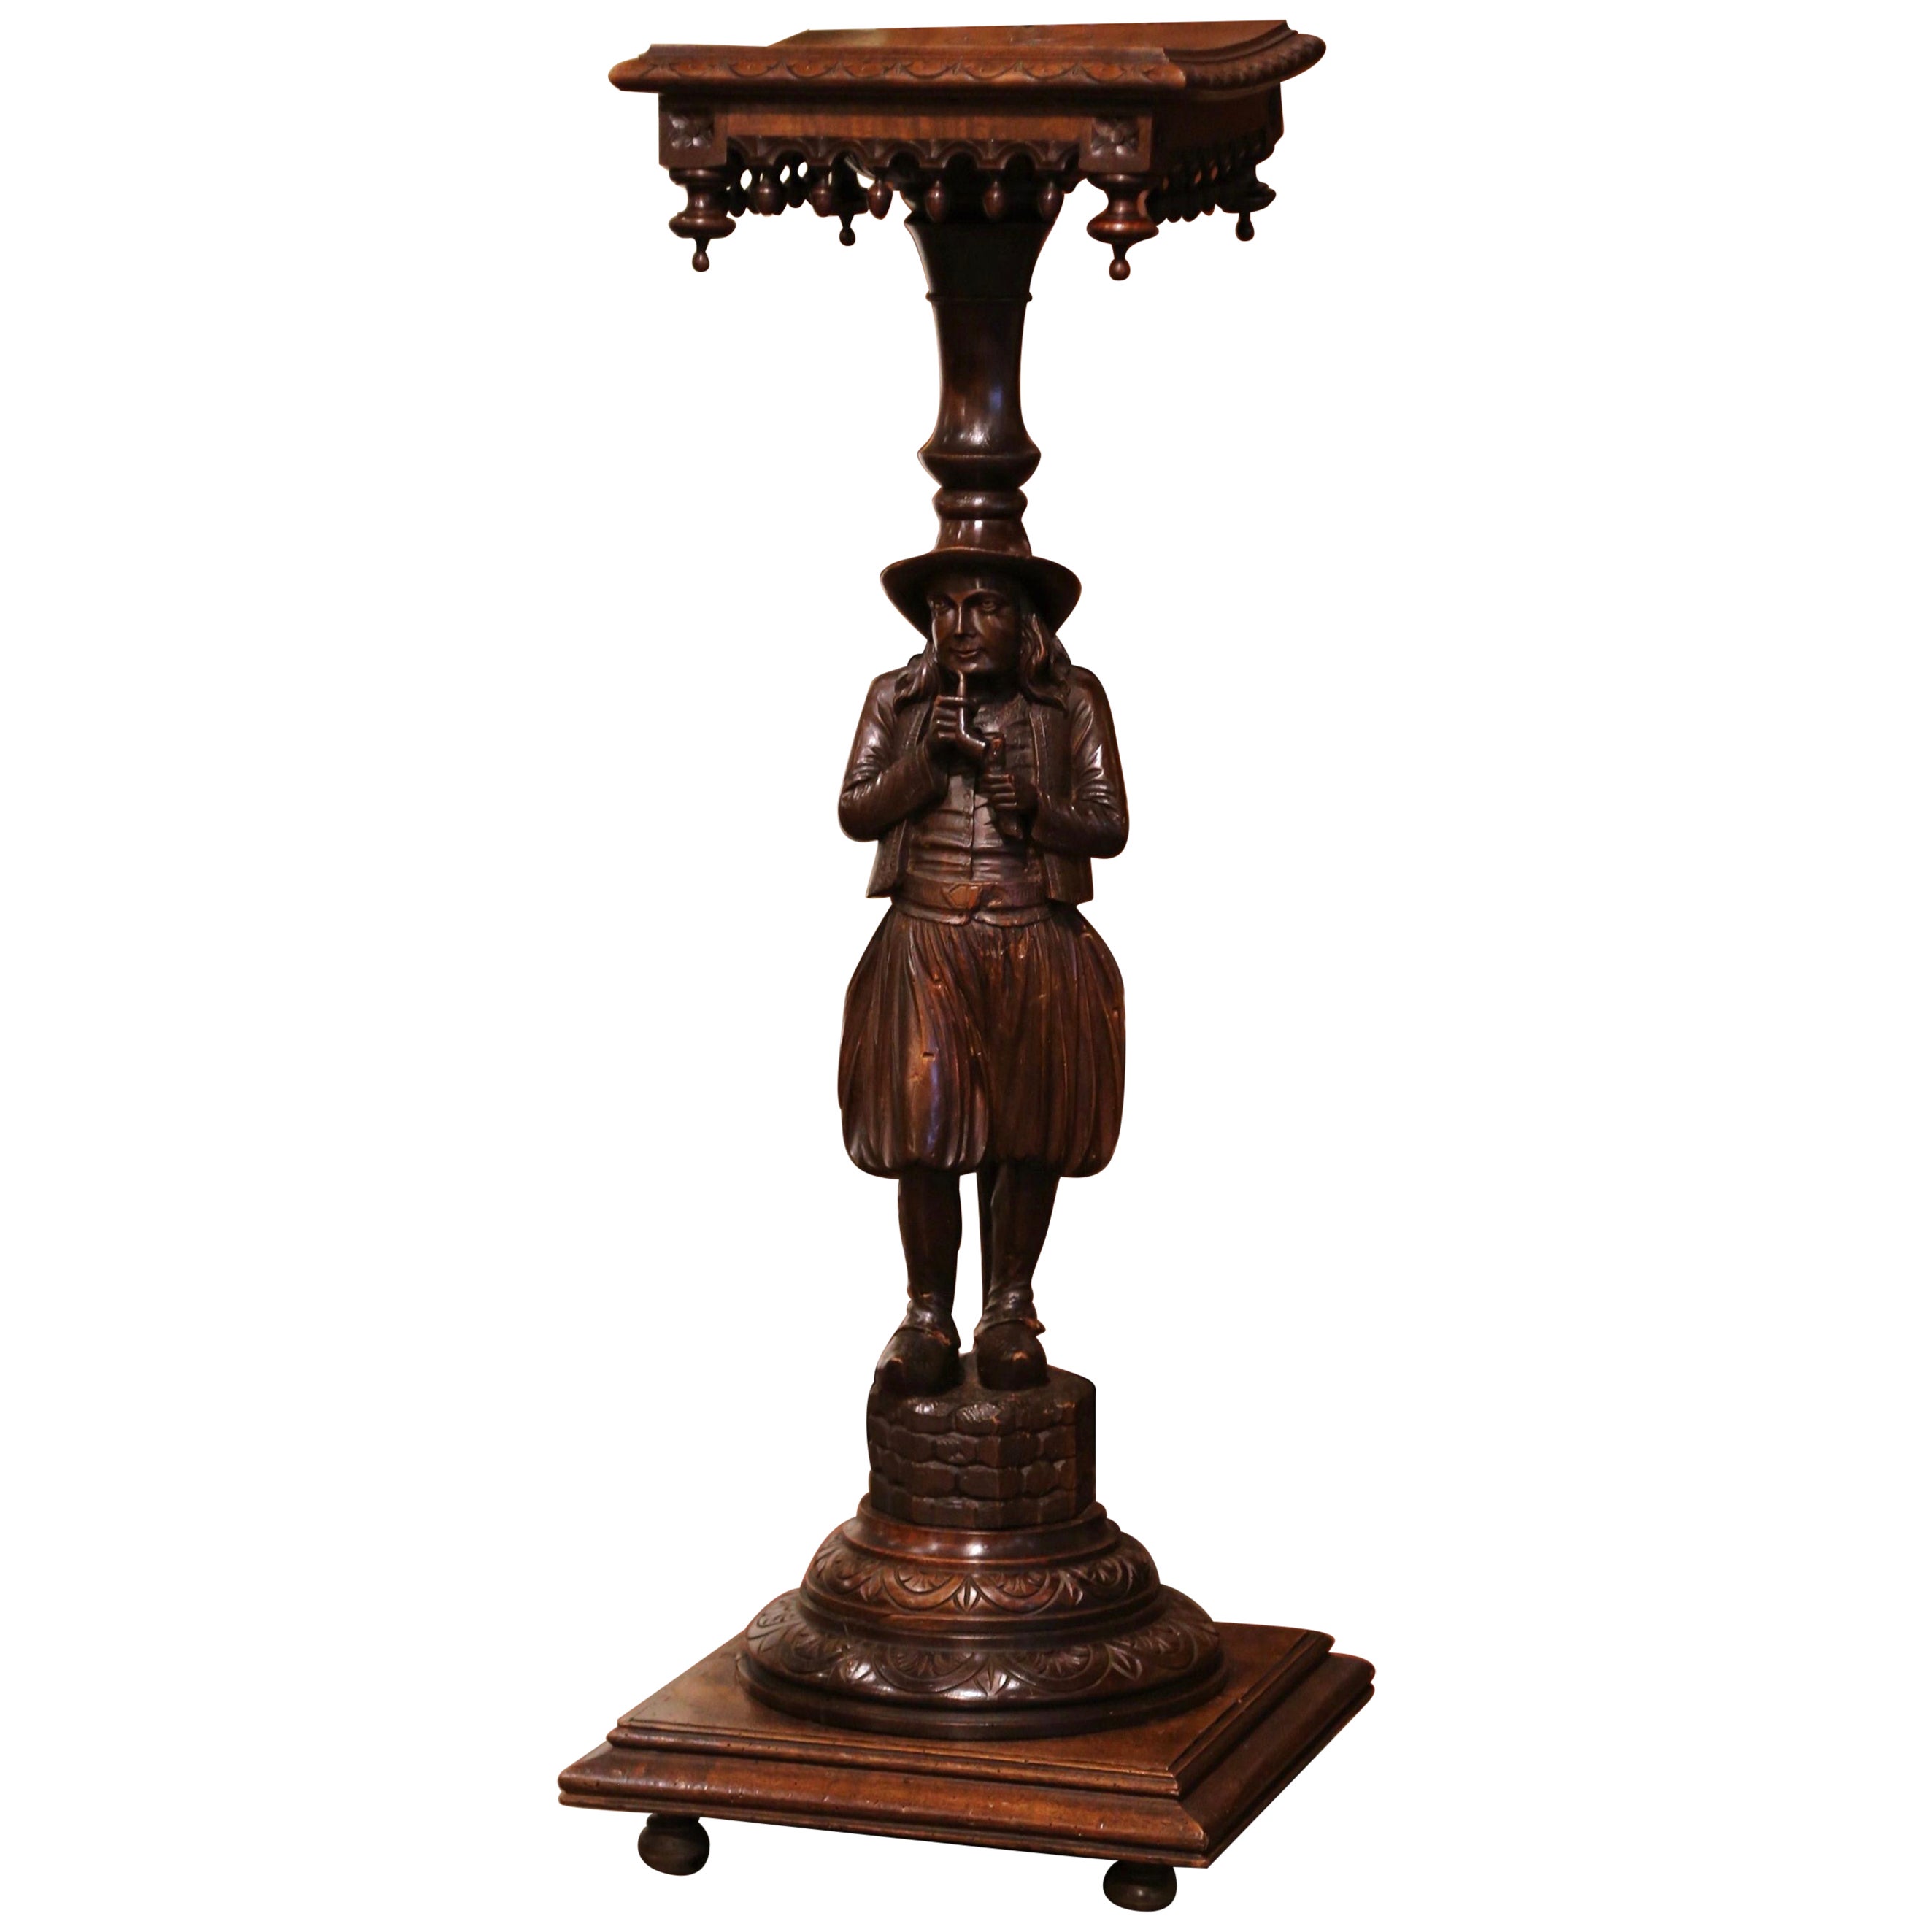 19th Century French Carved Chestnut Pedestal Table with Breton Man Figure